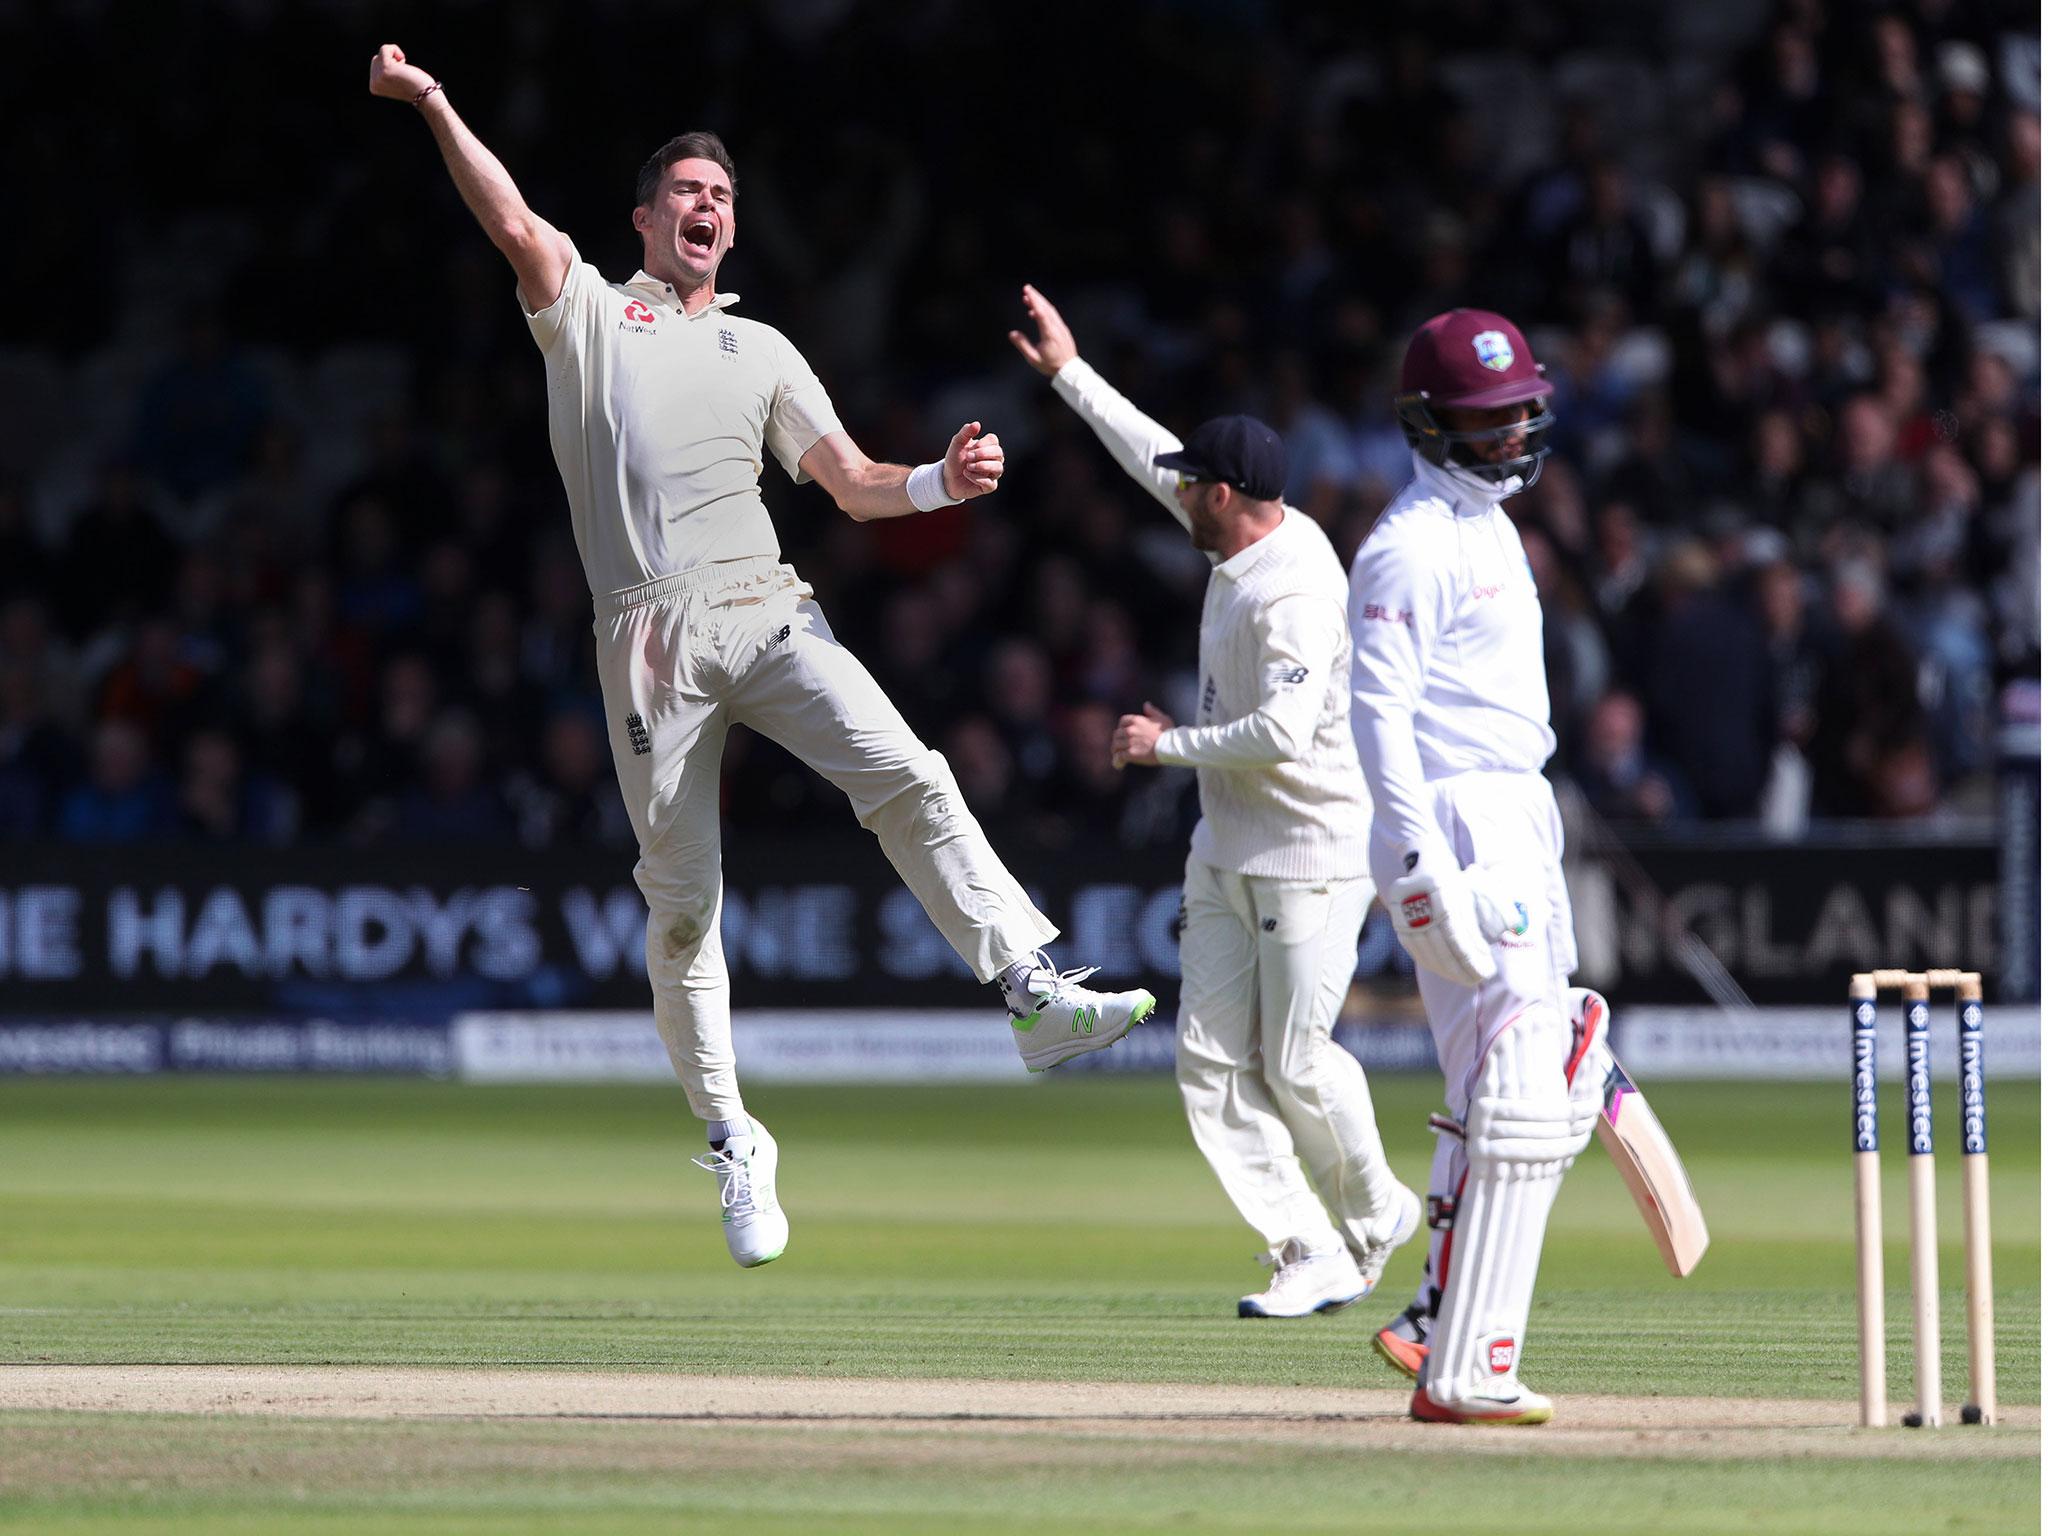 James Anderson celebrates after taking his fifth wicket of the second innings